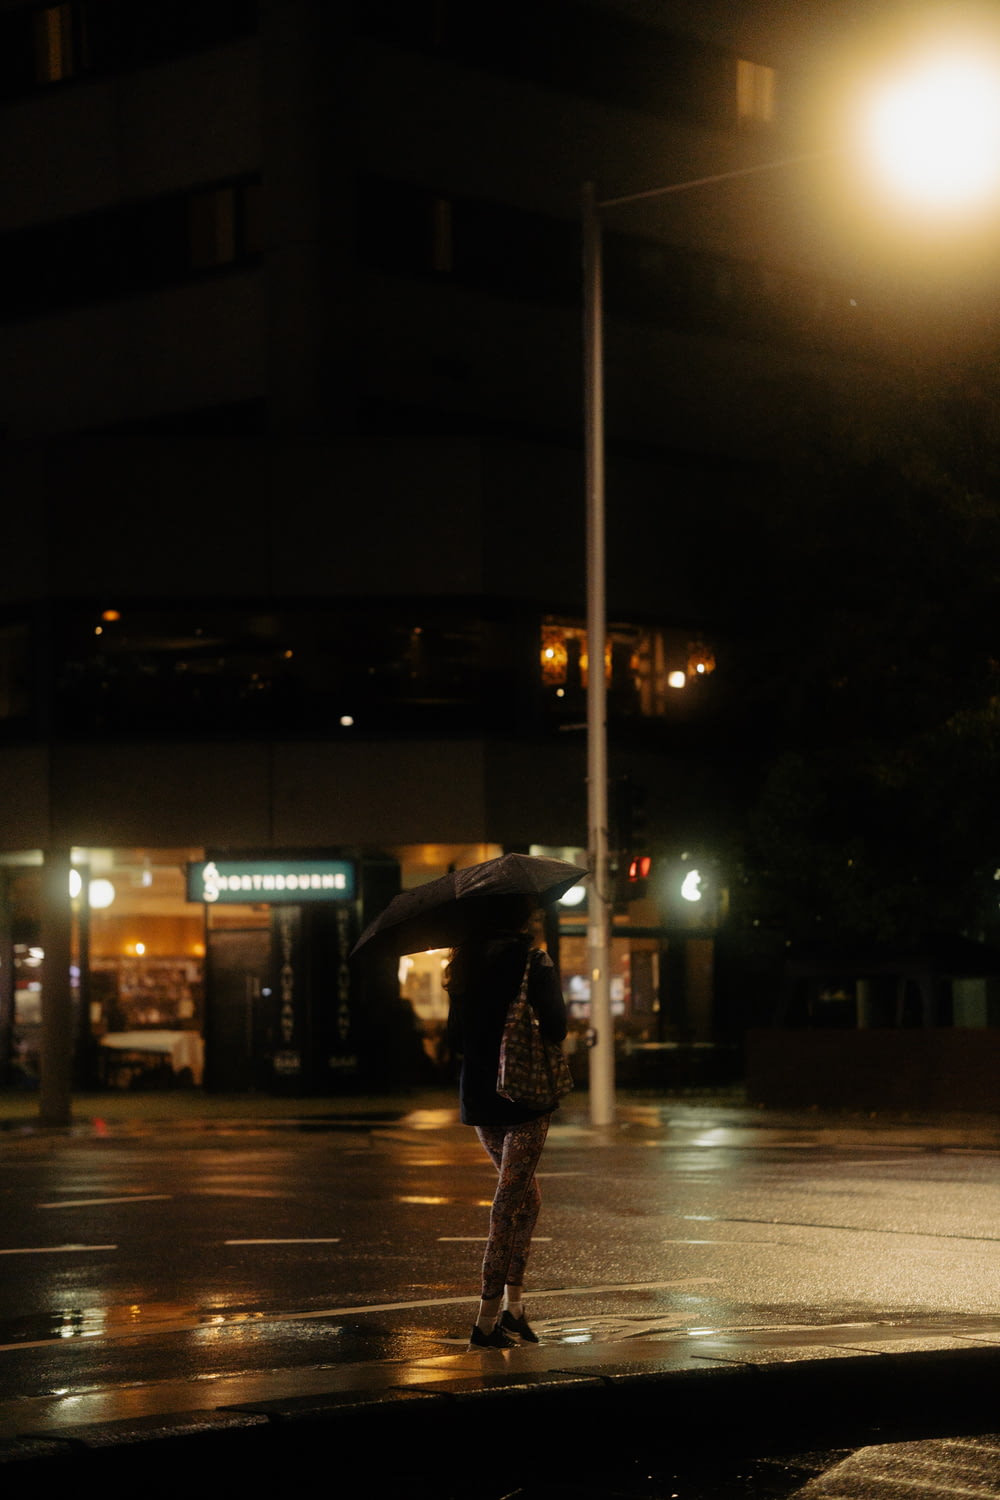 a person holding an umbrella on a rainy night